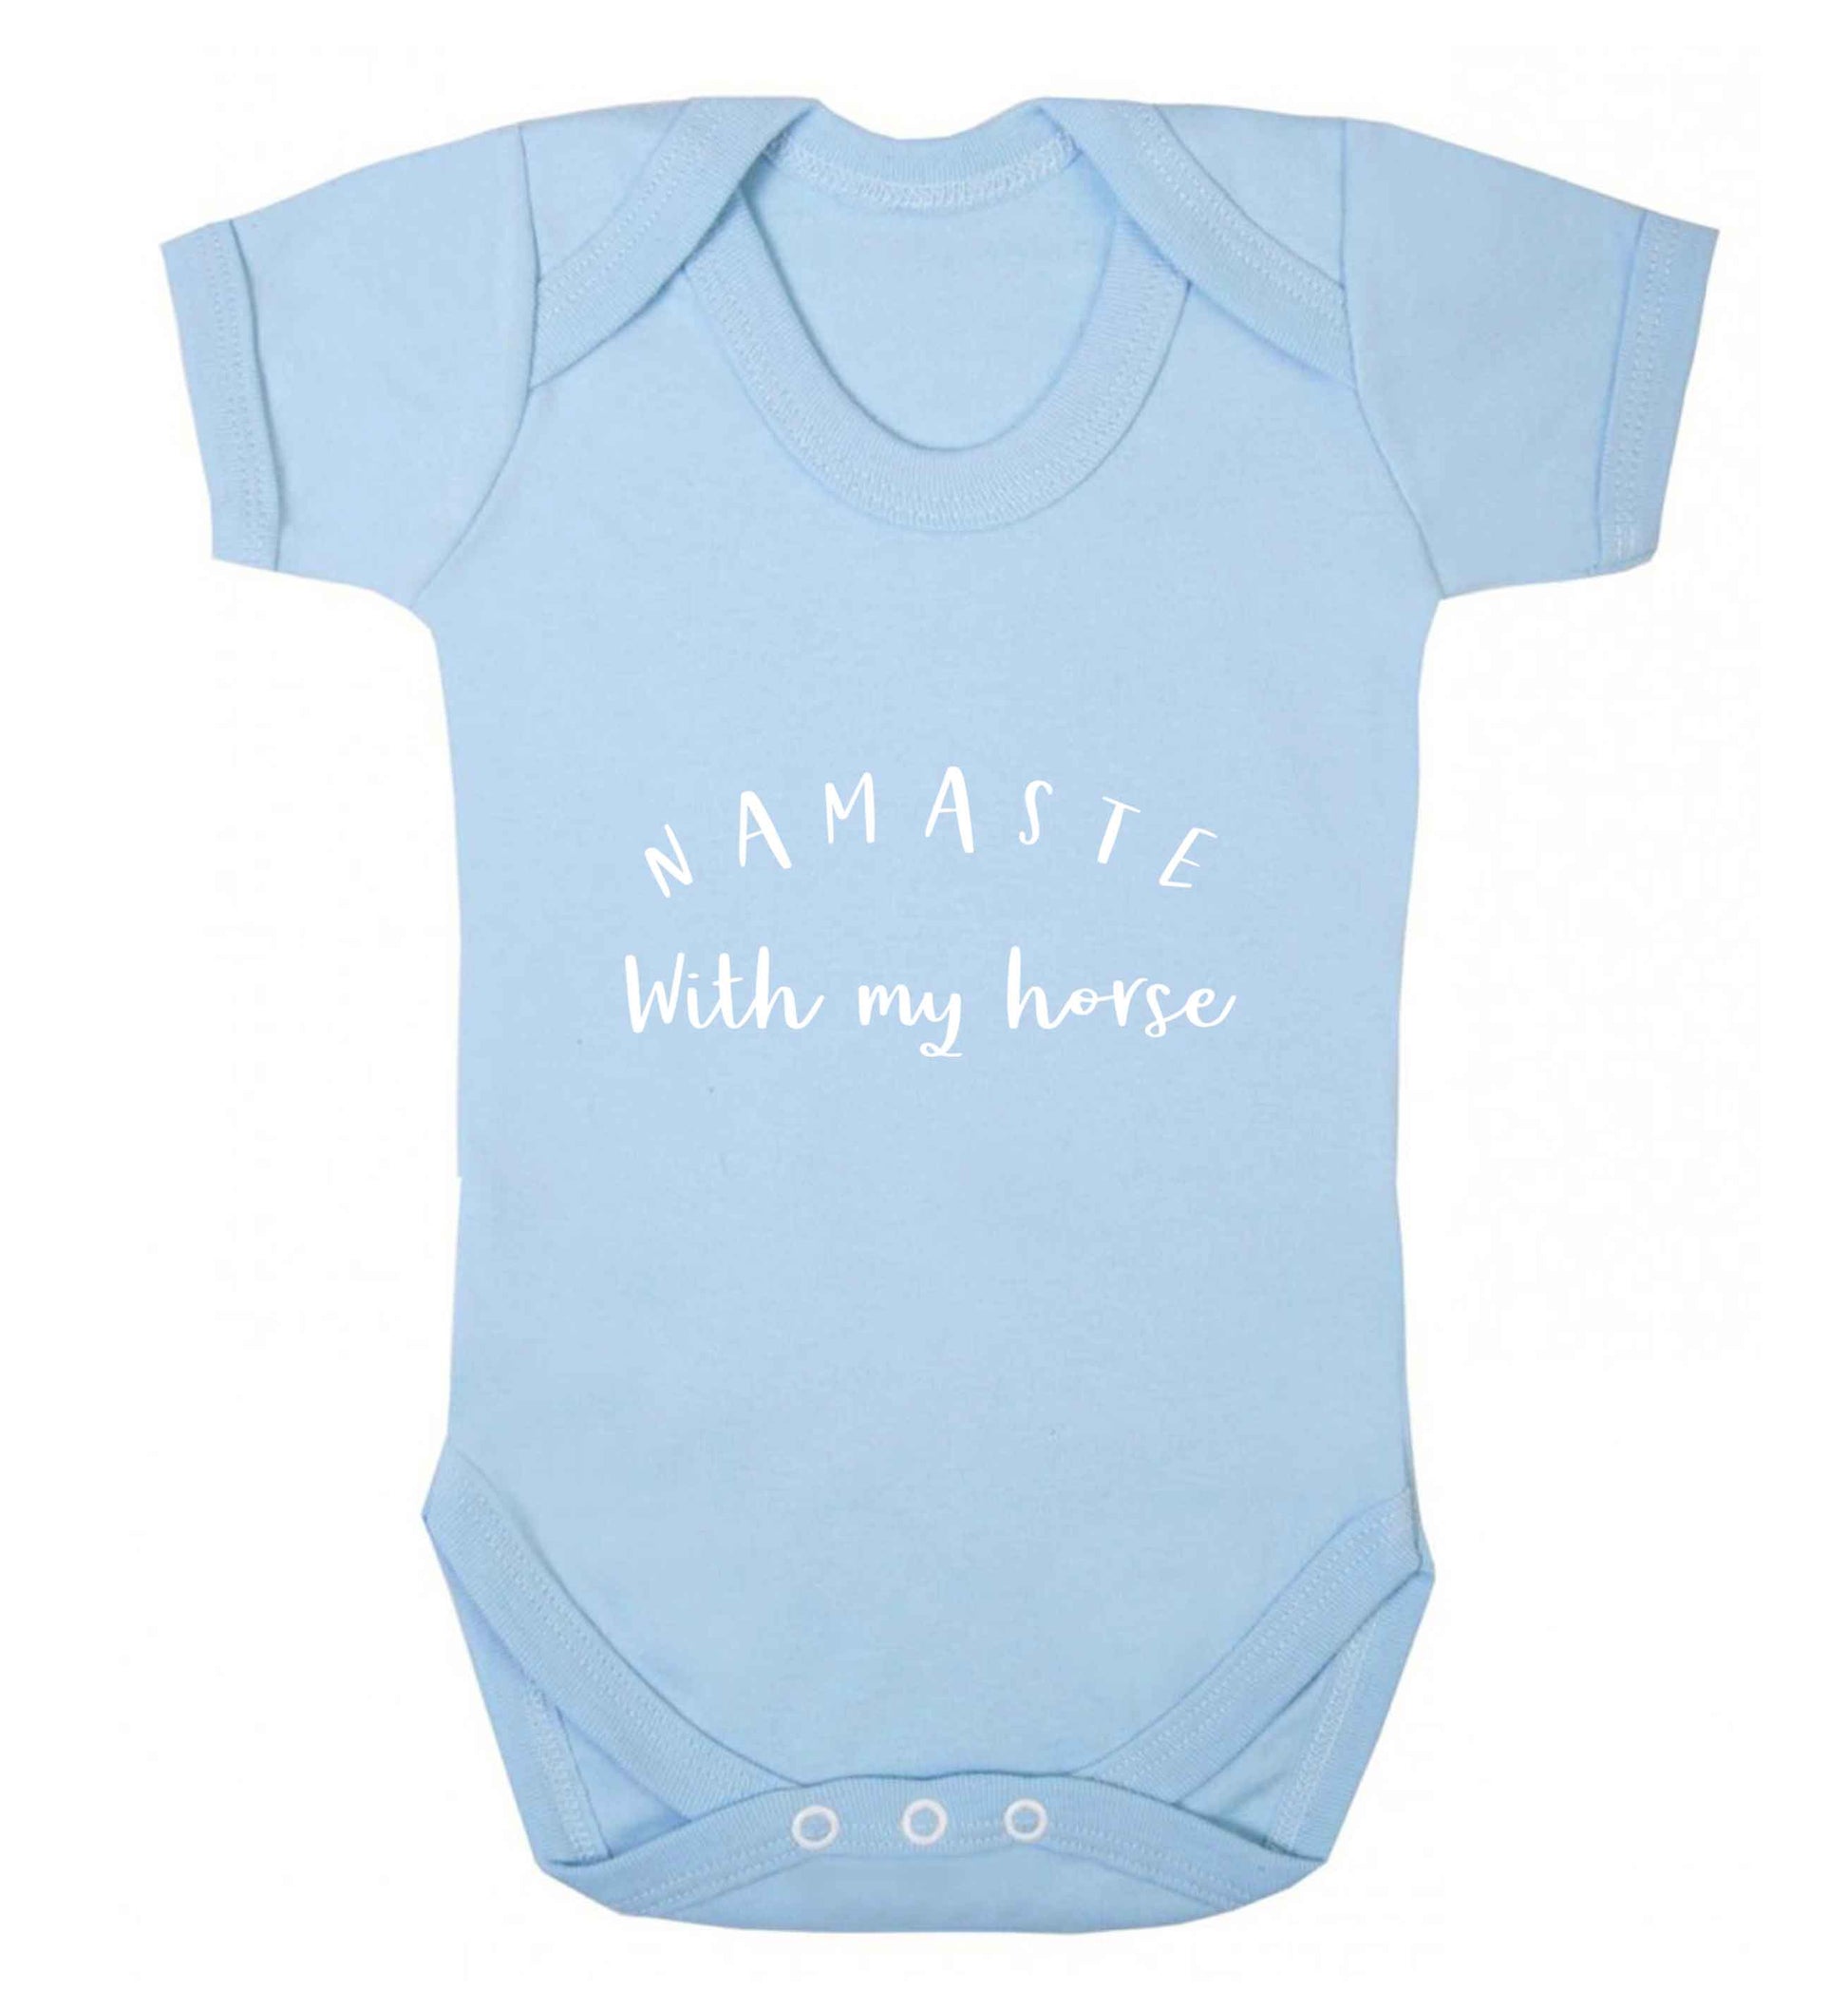 Namaste with my horse baby vest pale blue 18-24 months